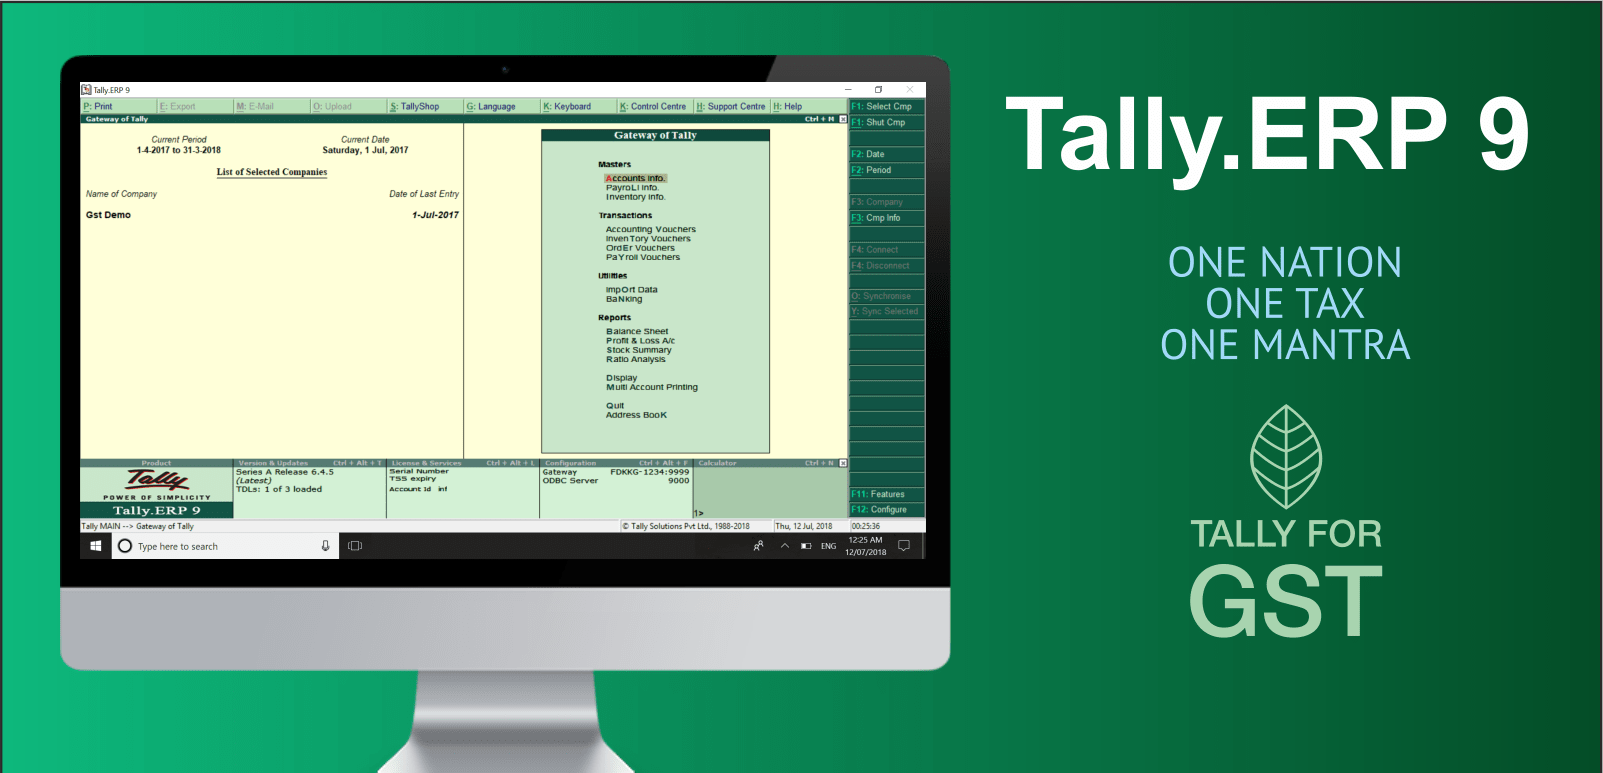 tally erp 9 release 3.2 gold edition download with crack